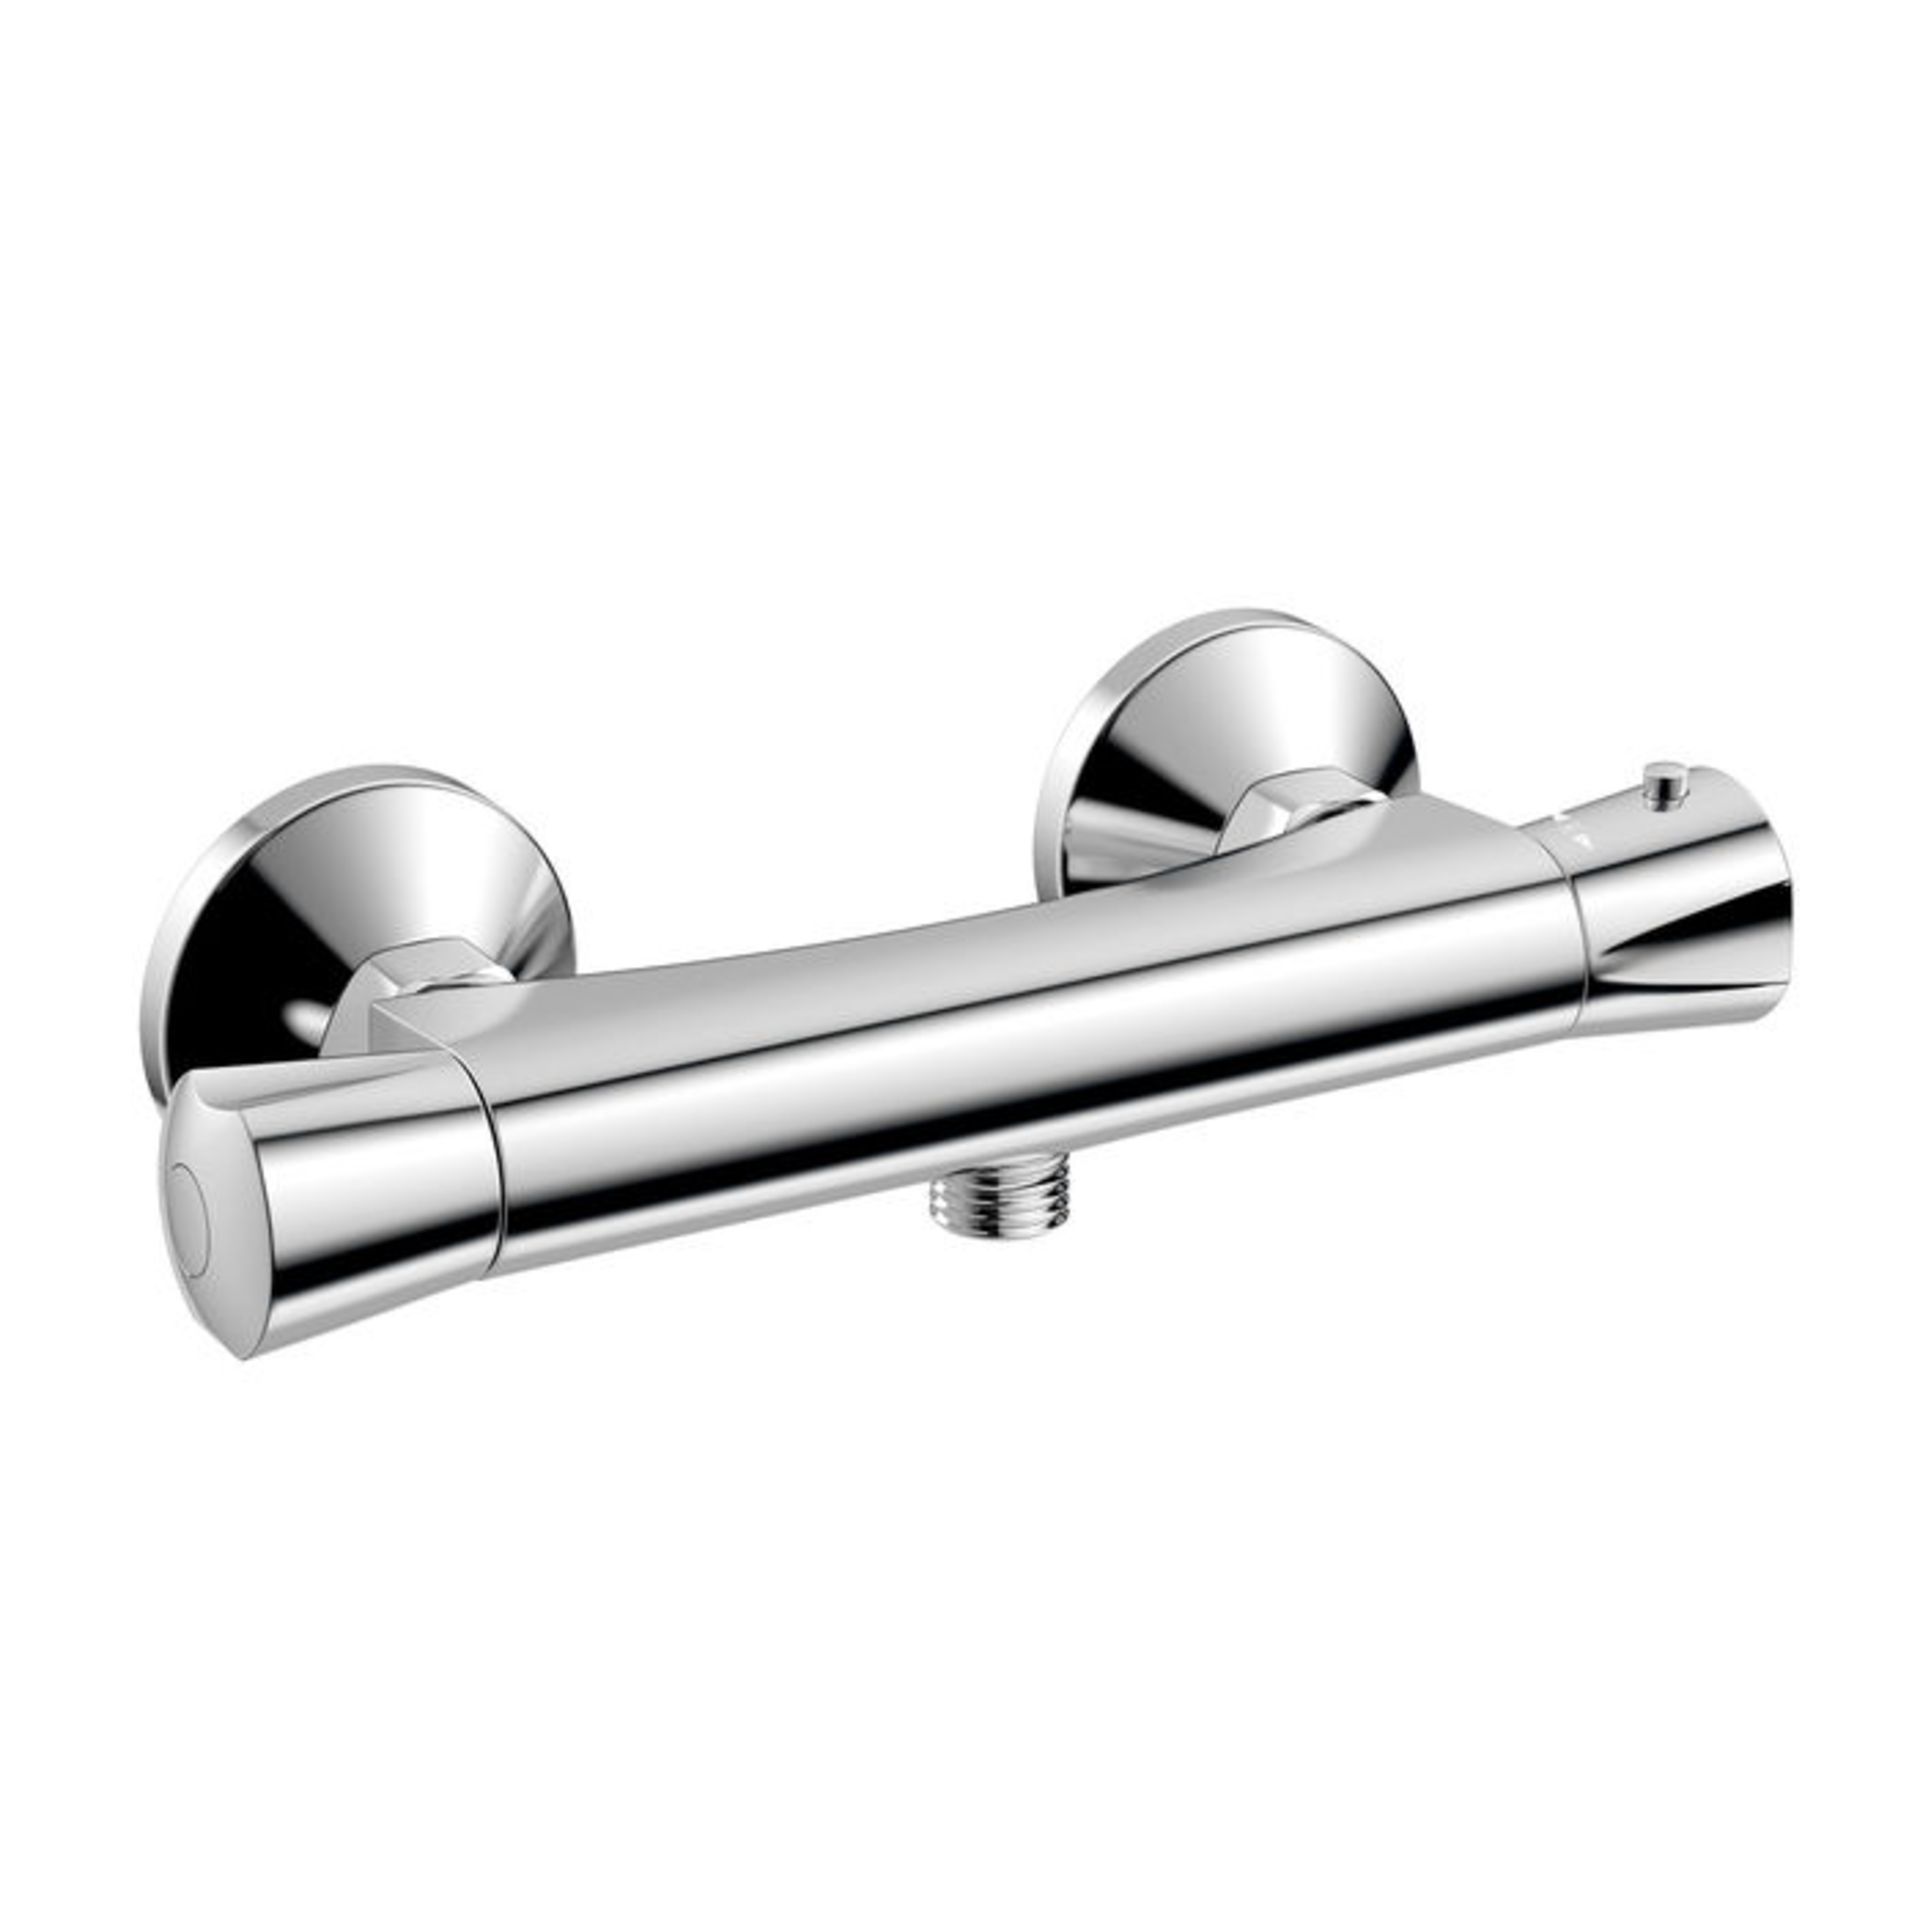 (D1009) Thermostatic Shower Valve - Round Bar Mixer Chrome plated solid brass mixer Cool to T... - Image 2 of 2